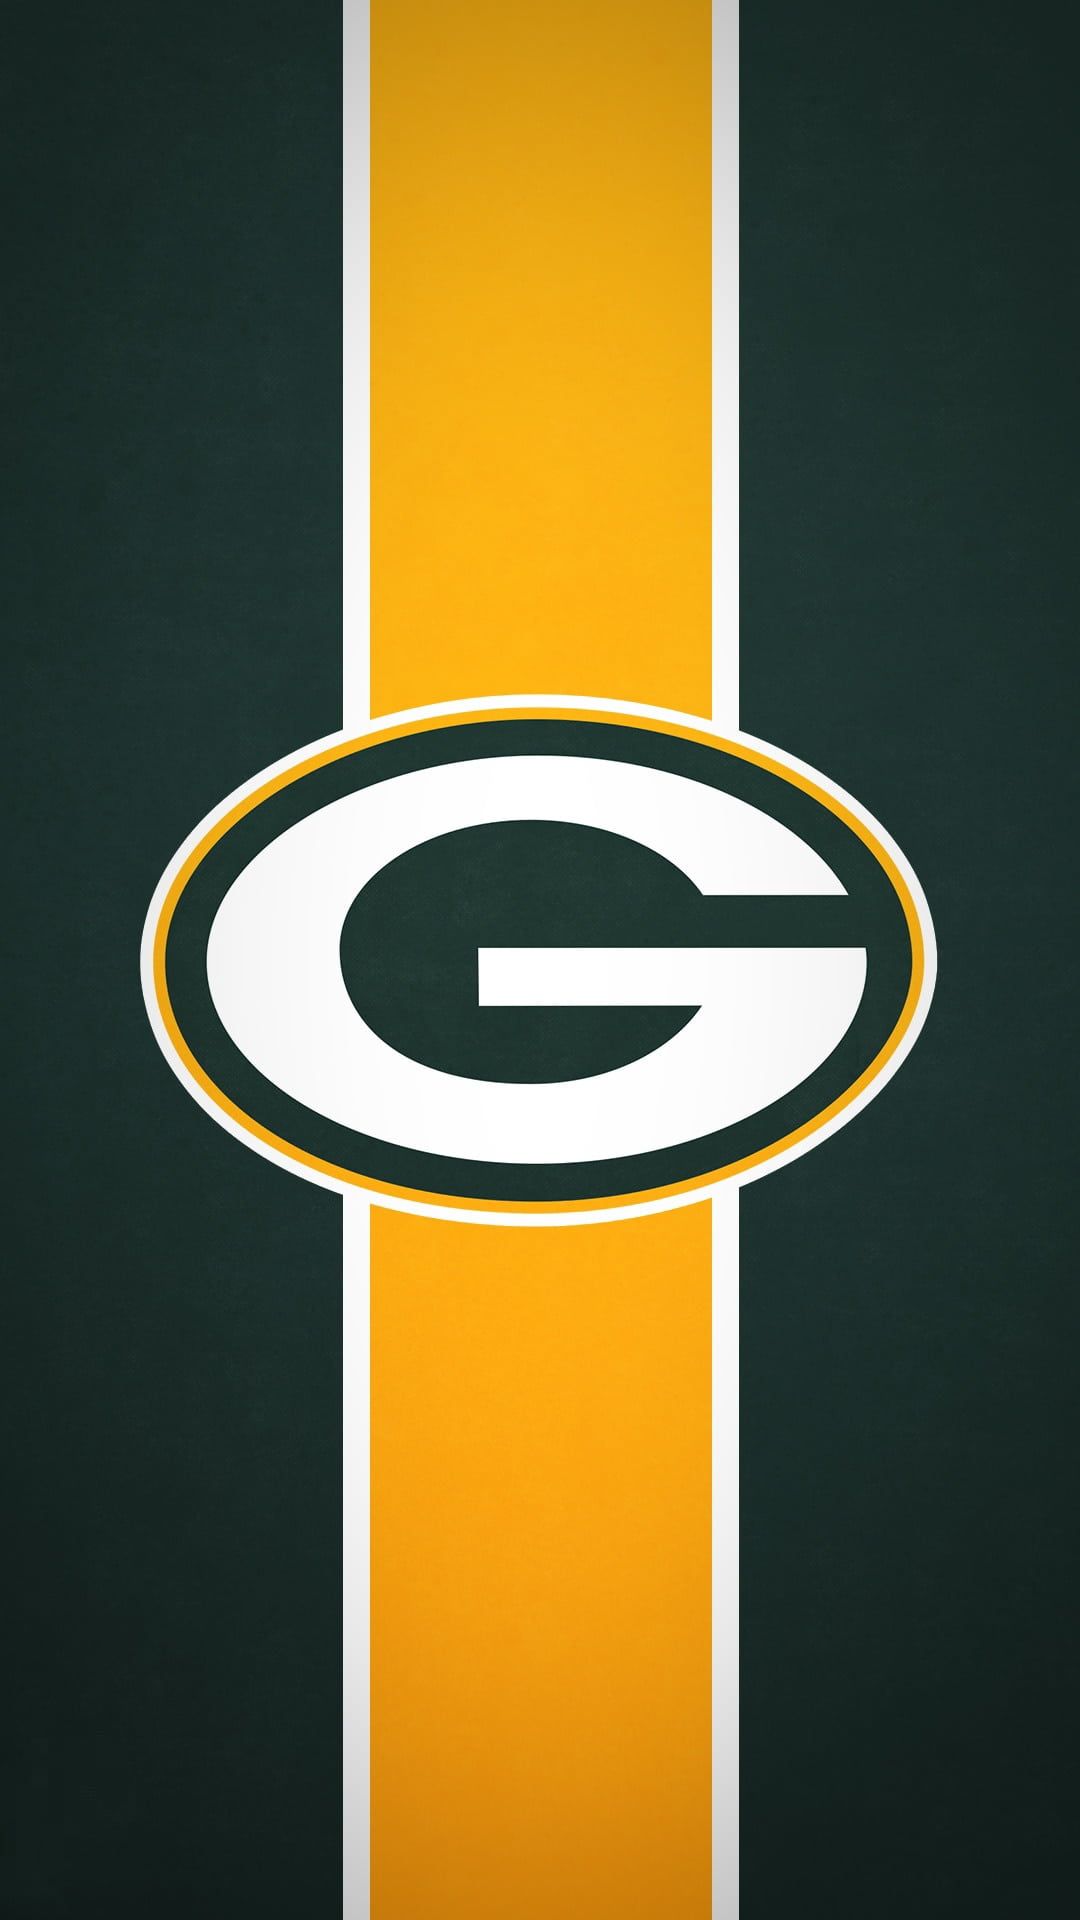 Green Bay Packers Logo Wallpapers - Top 29 Best Green Bay Packers Logo  Wallpapers [ HQ ]